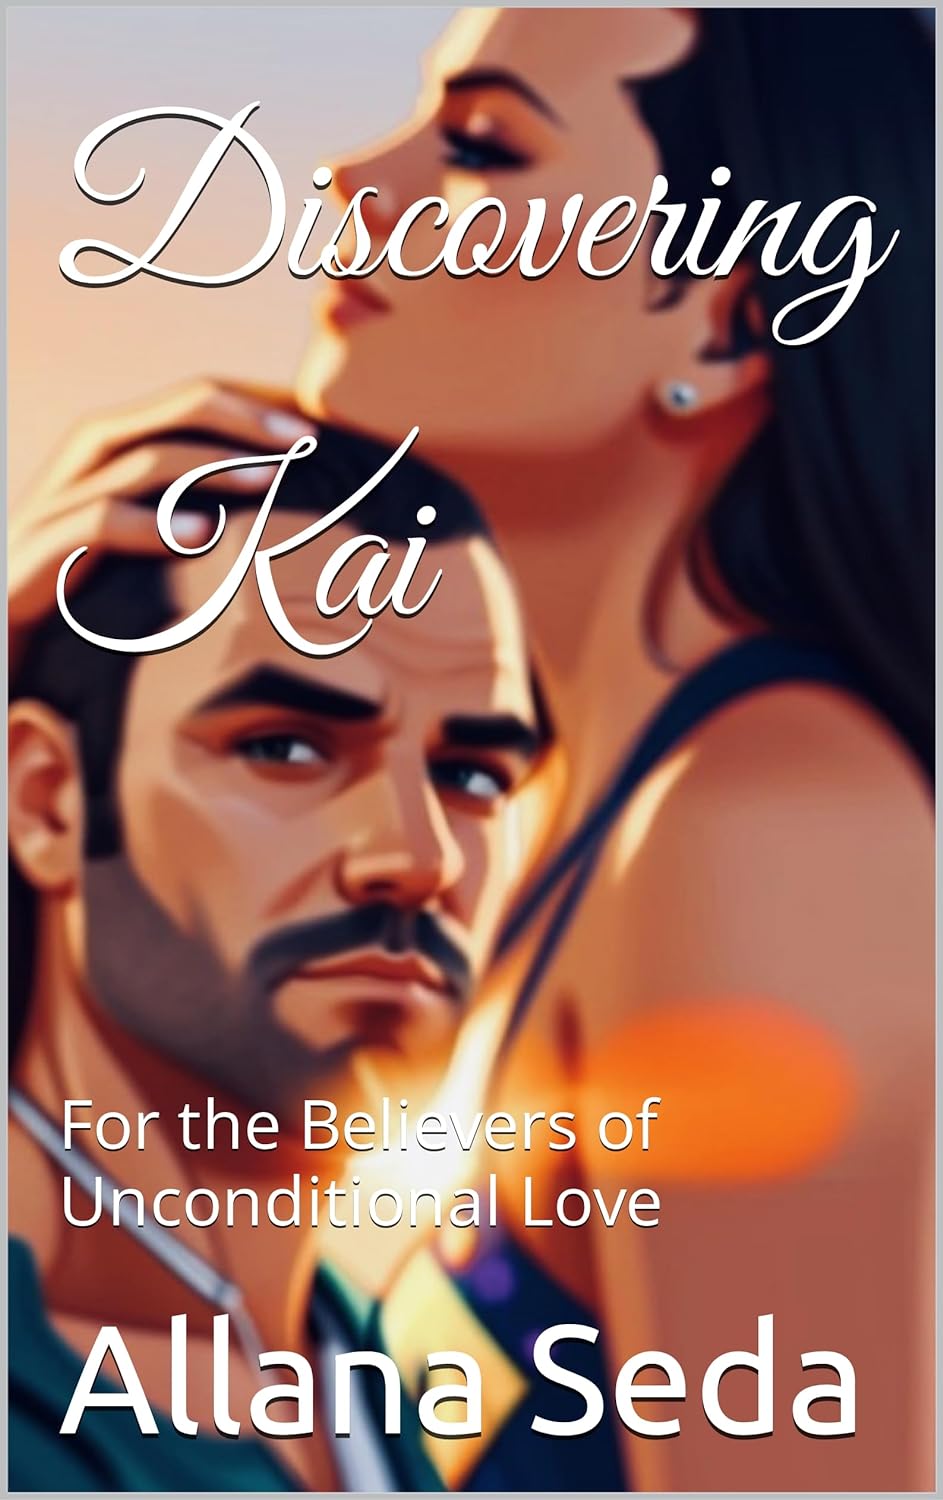 Karena Kapoor Sexes Hd Fuking Videos Download - Discovering Kai : For the Believers of Unconditional Love by Allana Seda